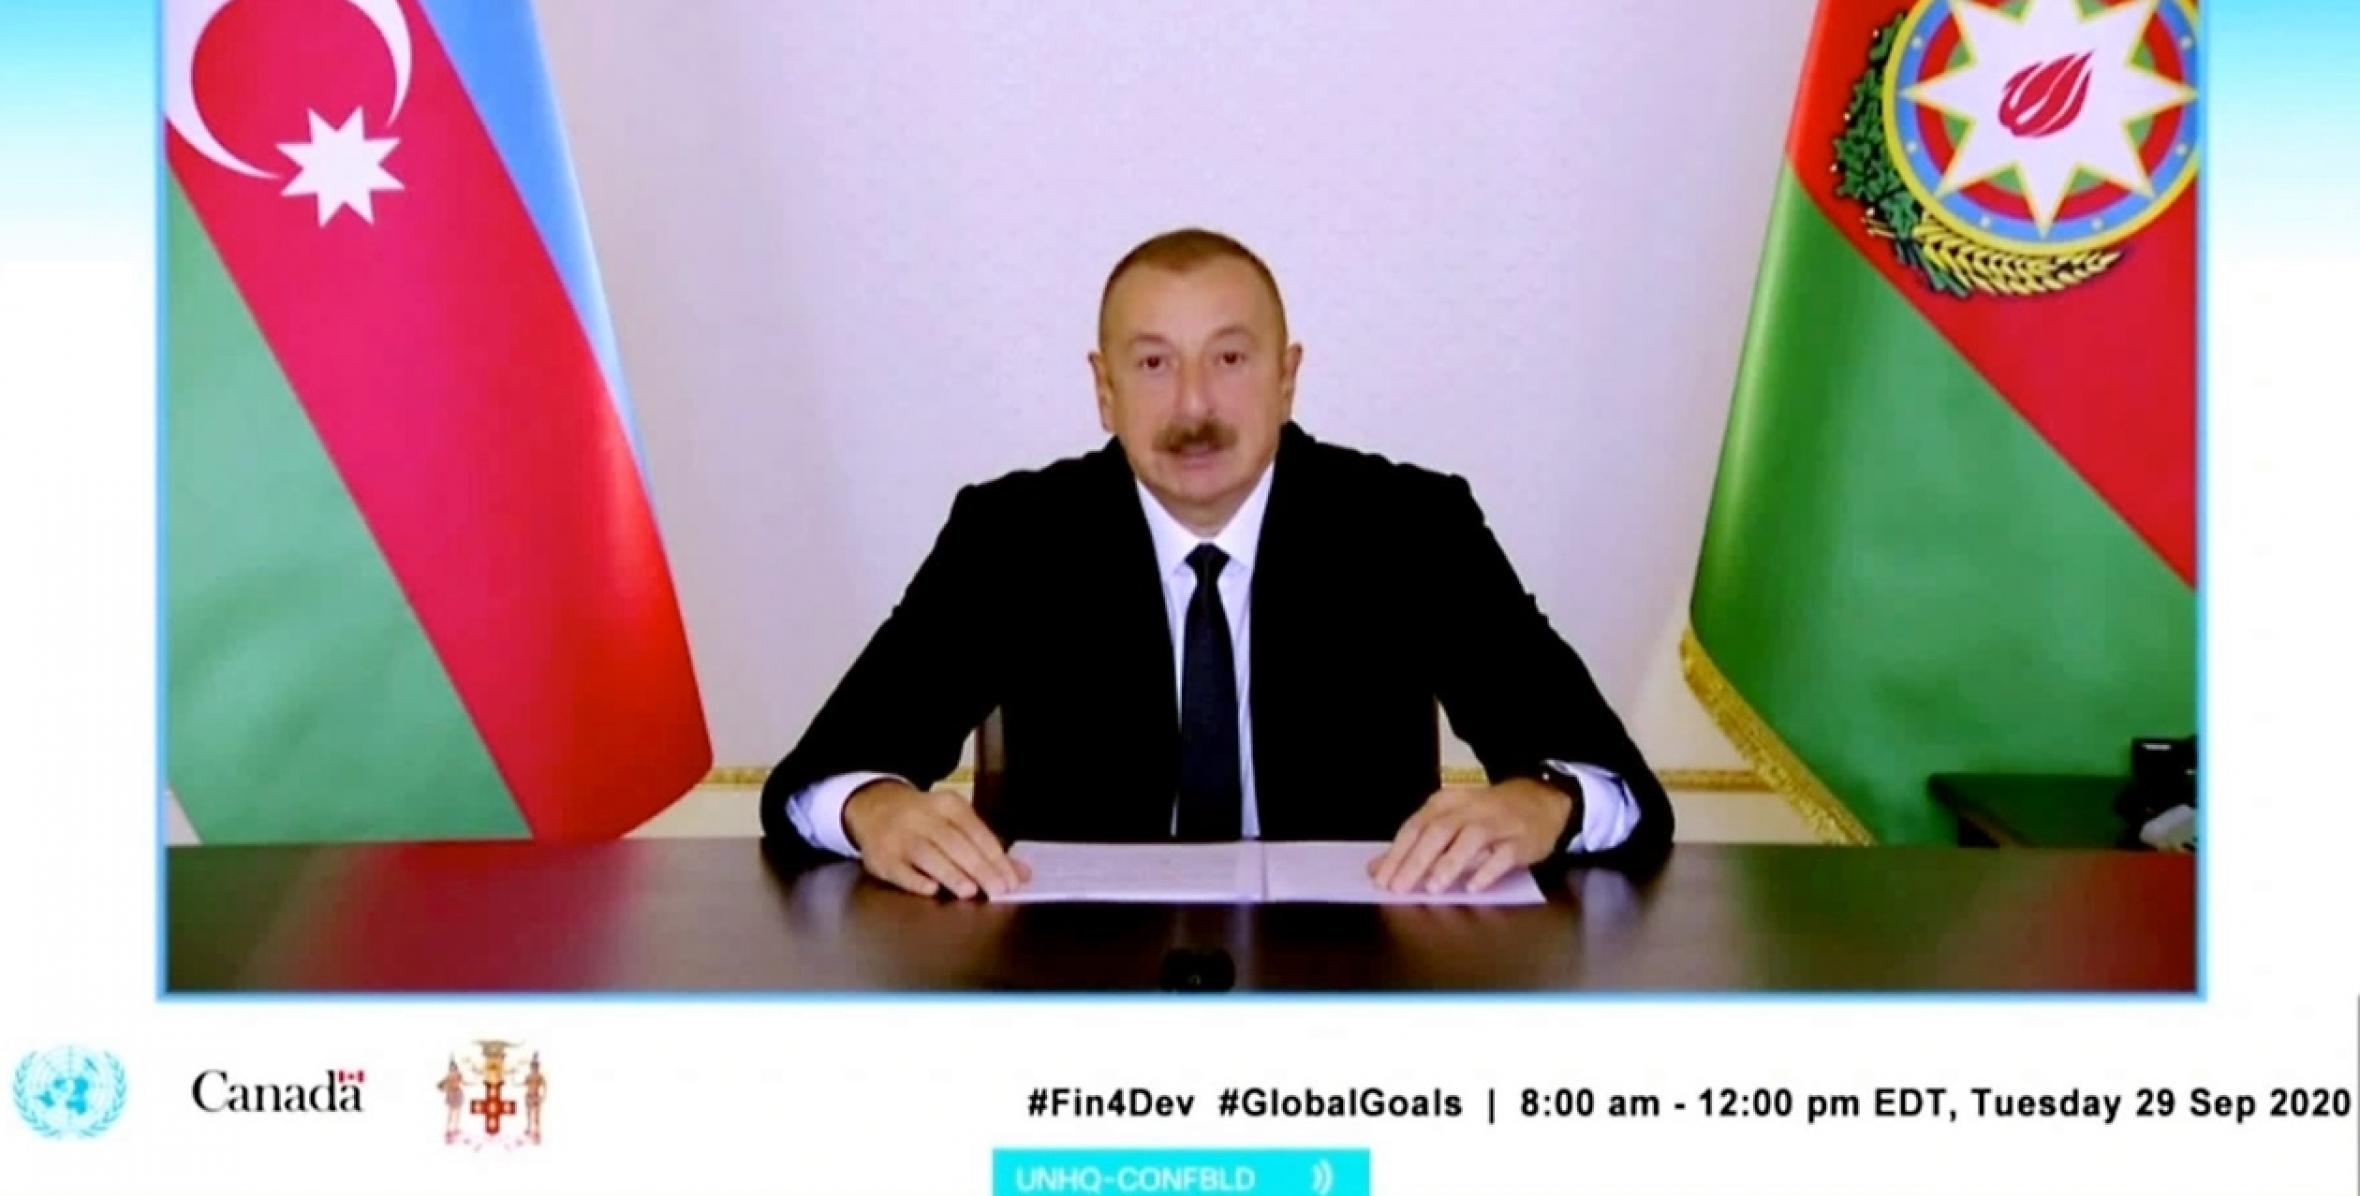 Ilham Aliyev made speech in a video format at a meeting of Heads of State and Government on “Financing the 2030 Agenda for Sustainable Development in the Era of COVID-19 and Beyond”